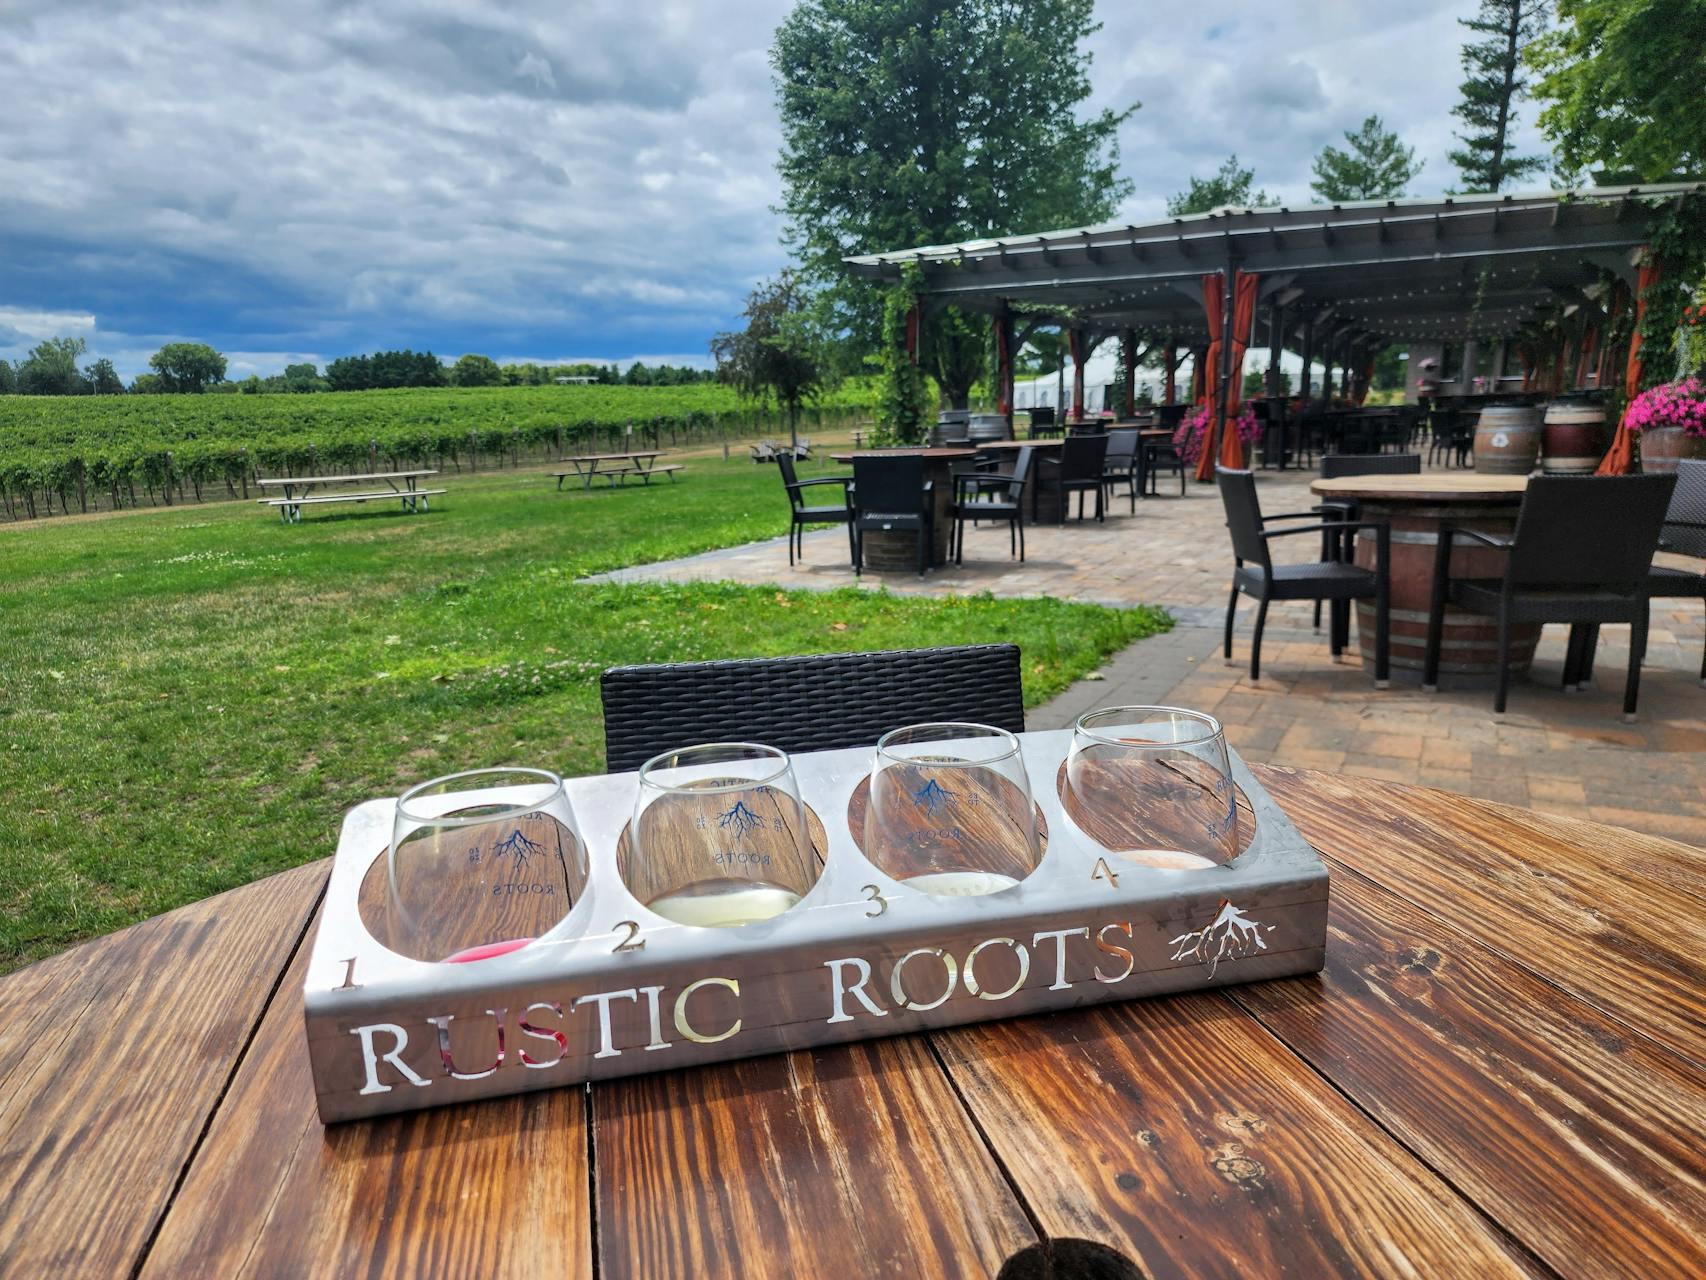 Rustic Roots Winery in Scandia.